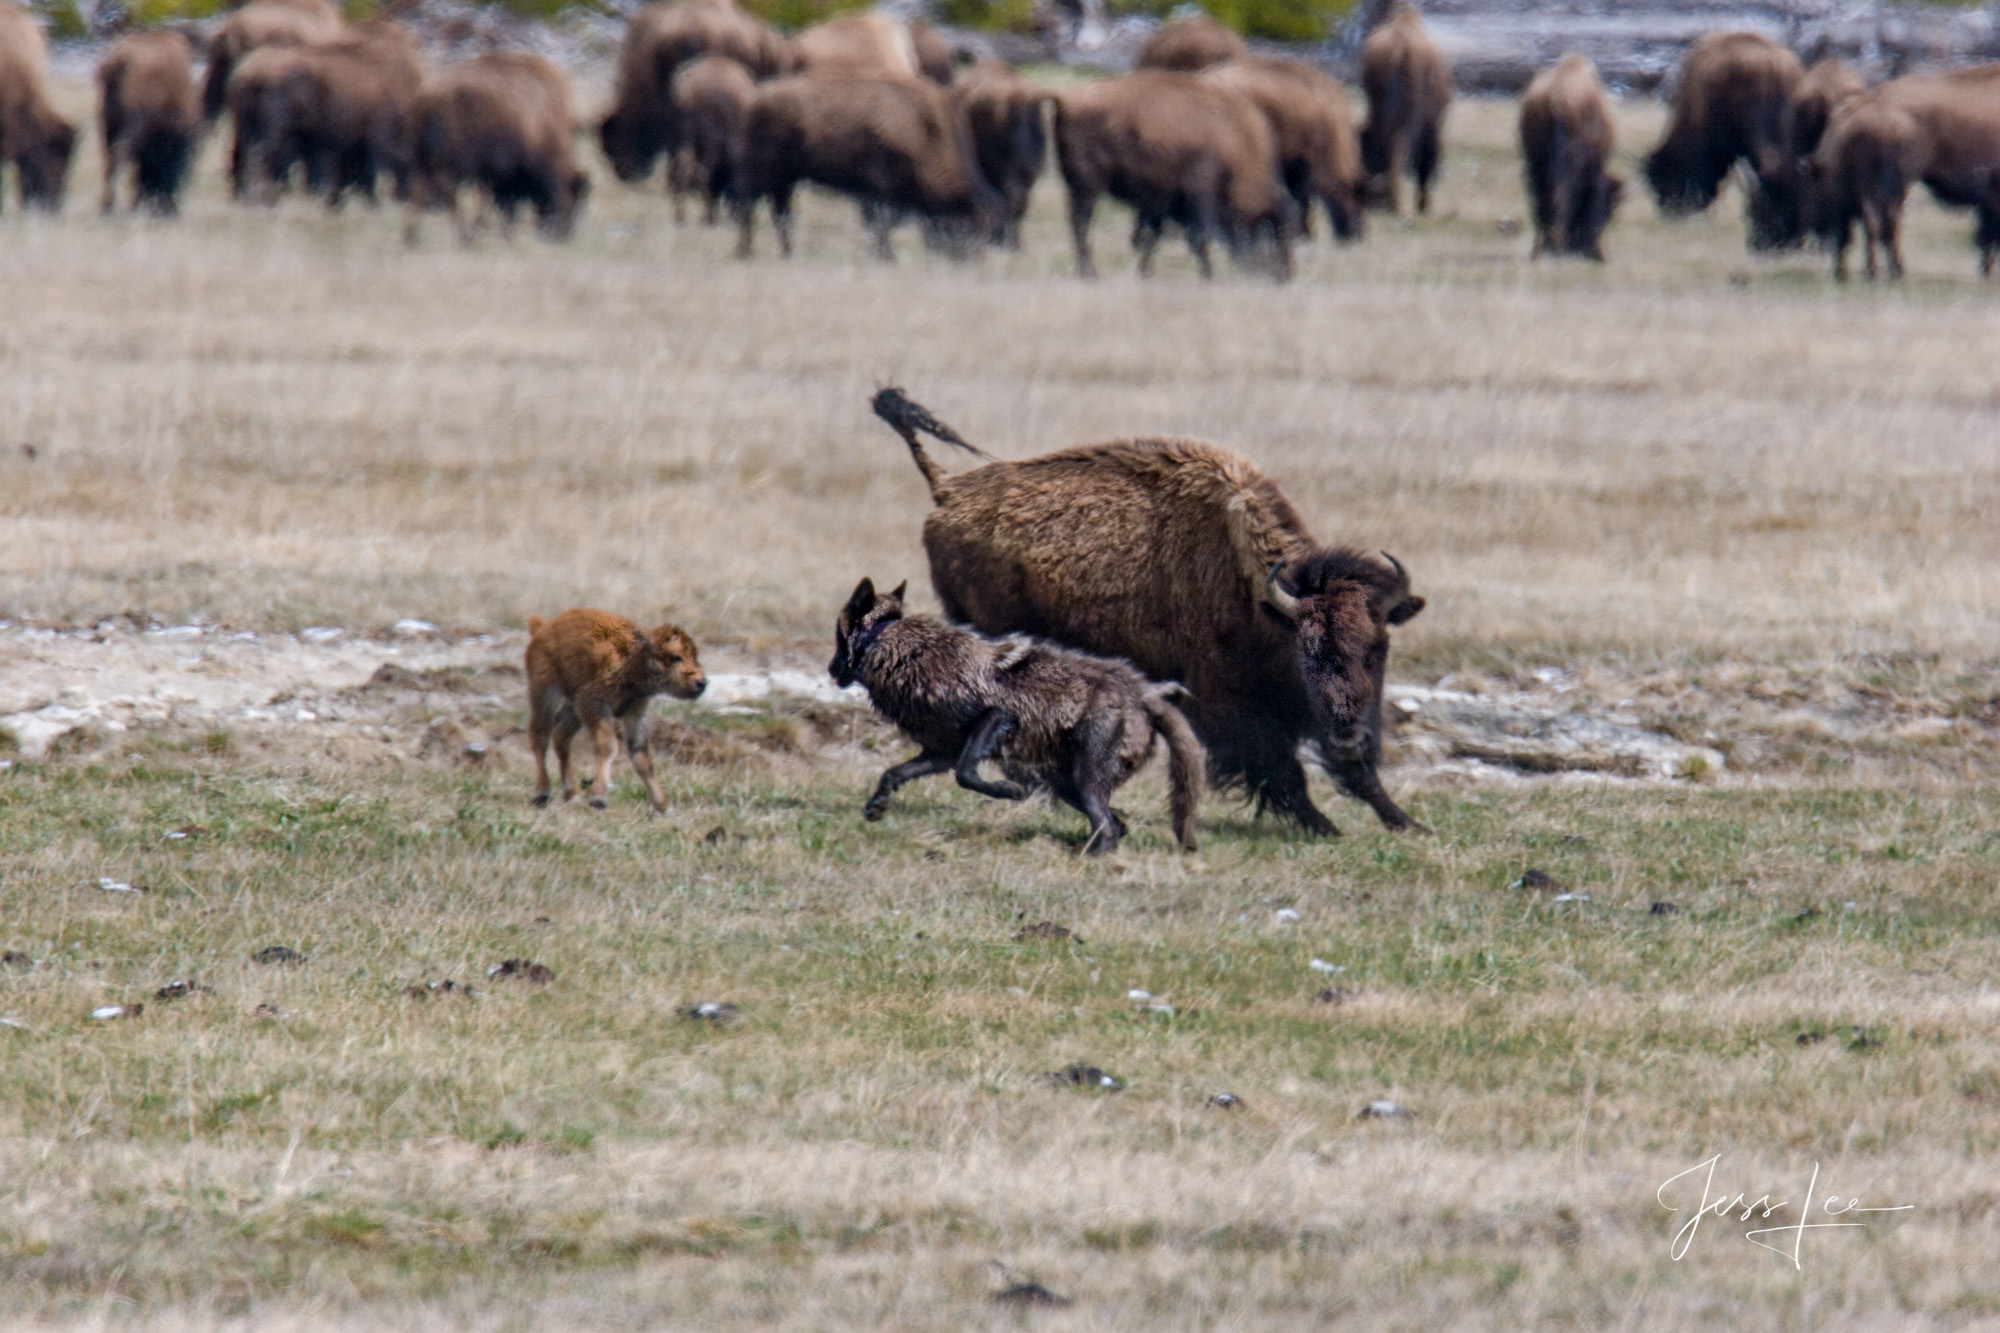 wolf trying to kill bison calf